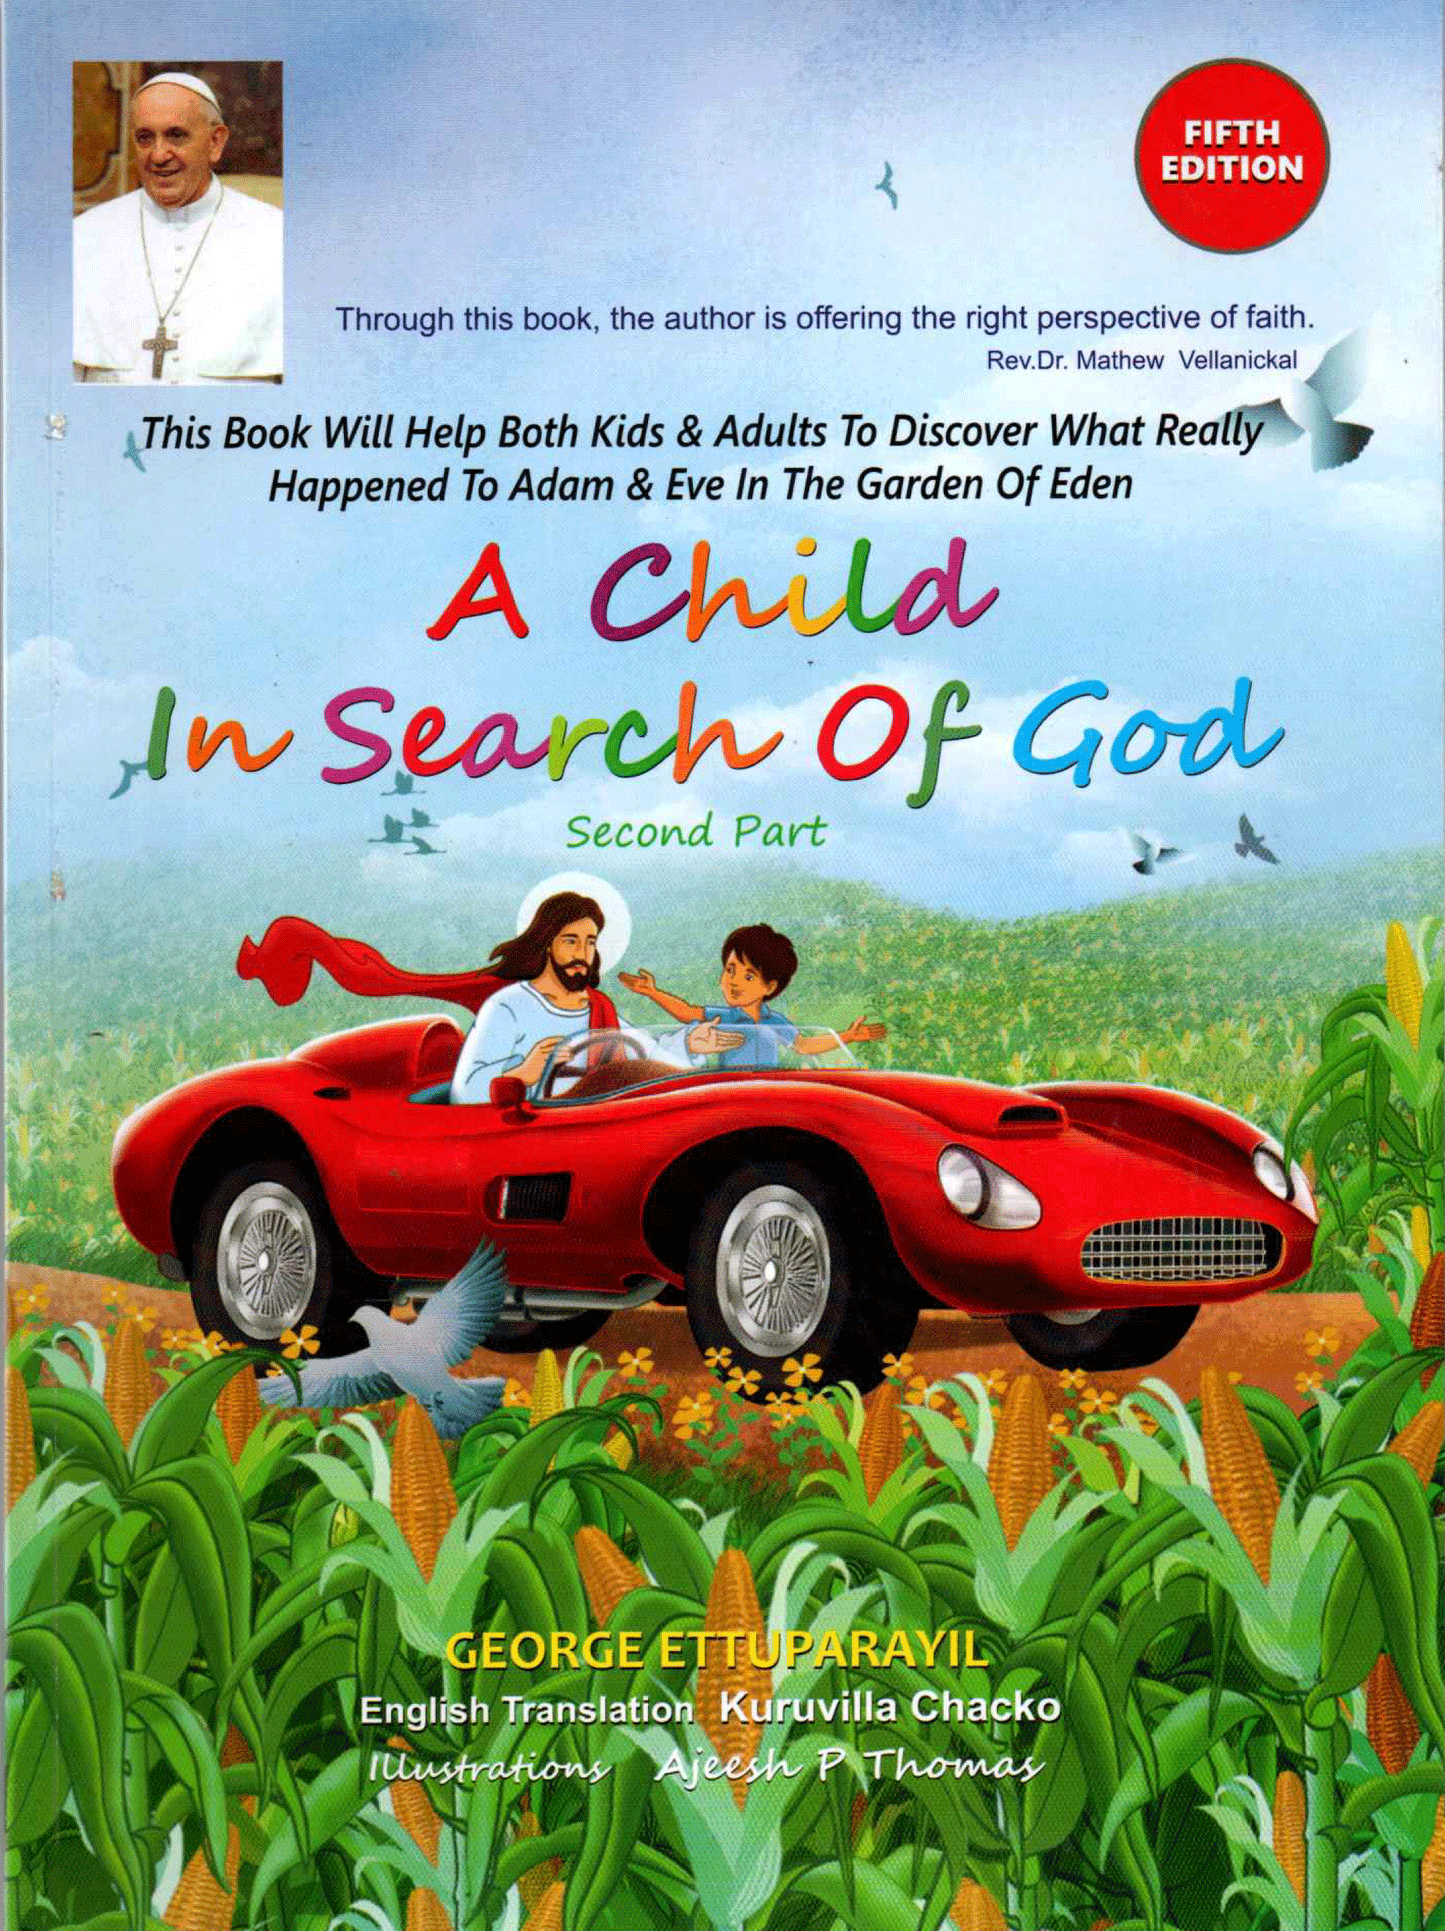 A Child in Search of God